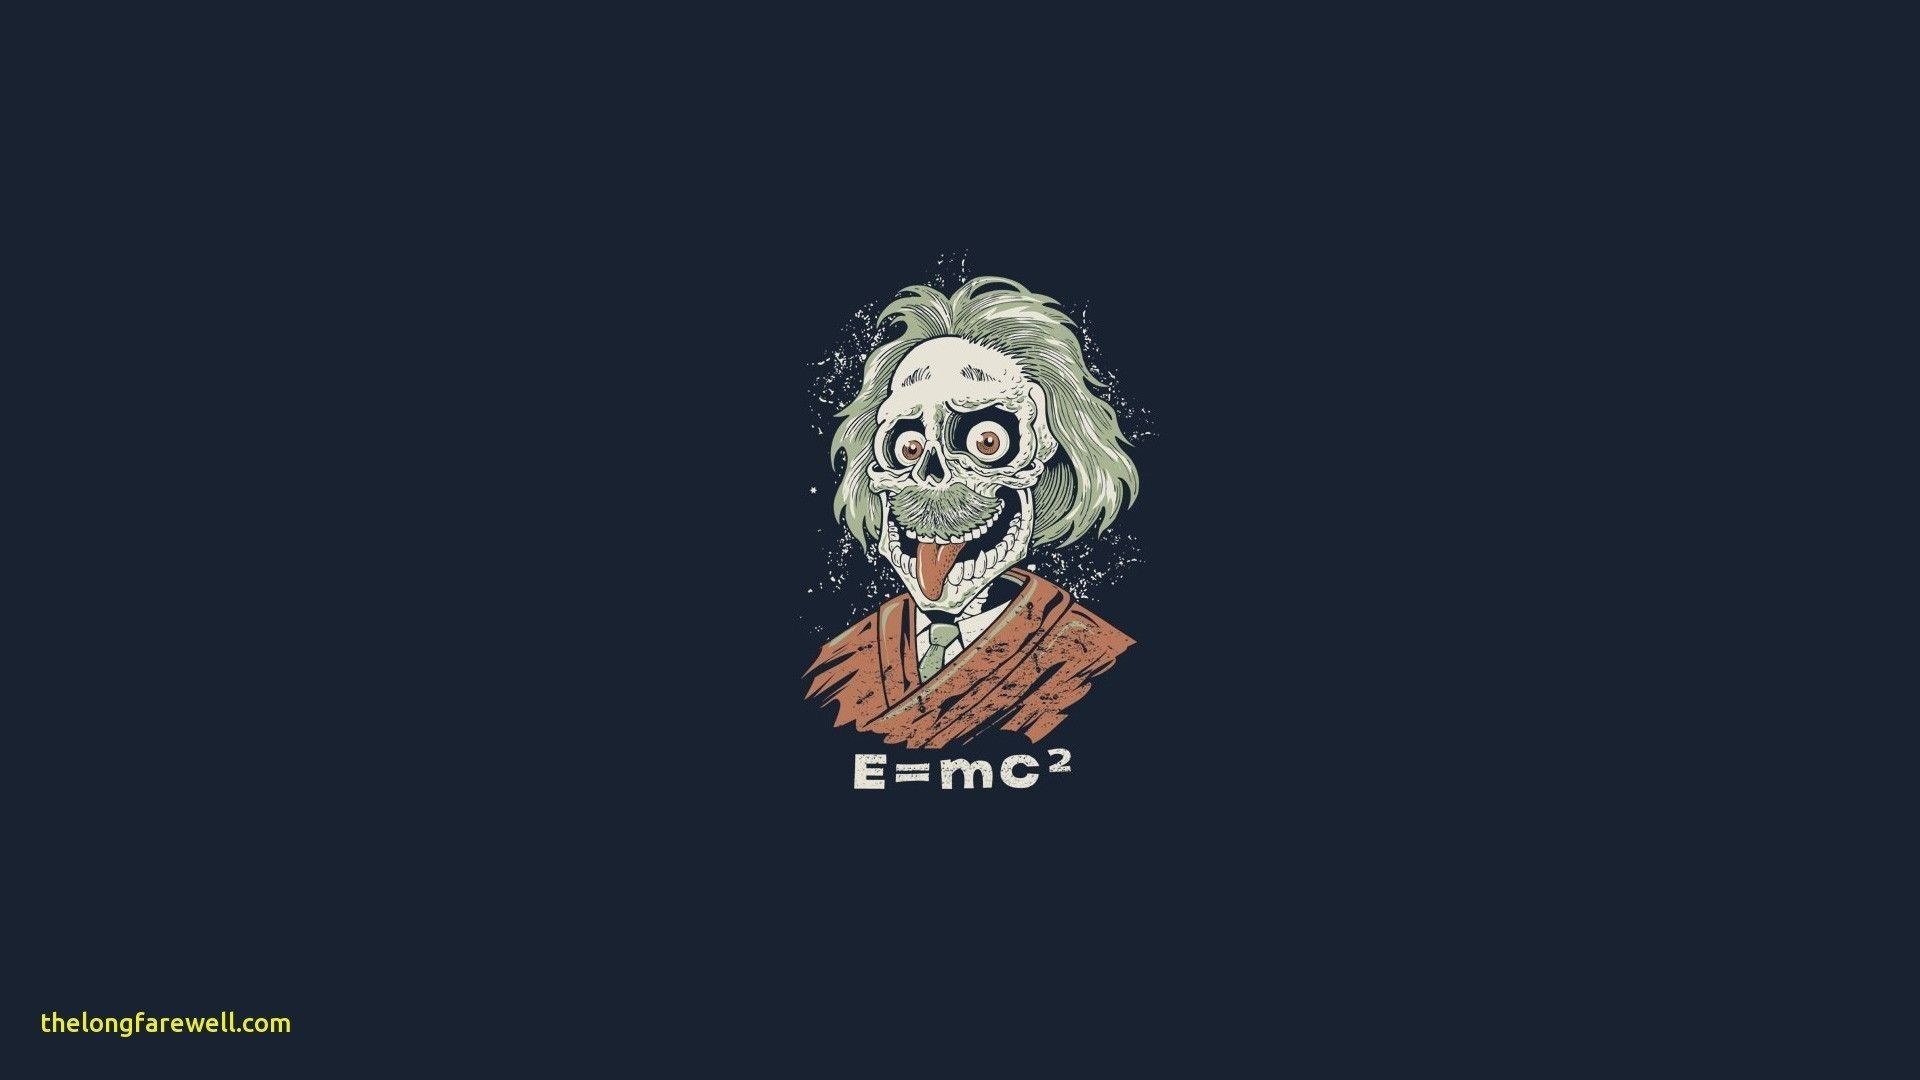 Dark wallpaper of the joker from batman with the equation e=mc squared - Funny